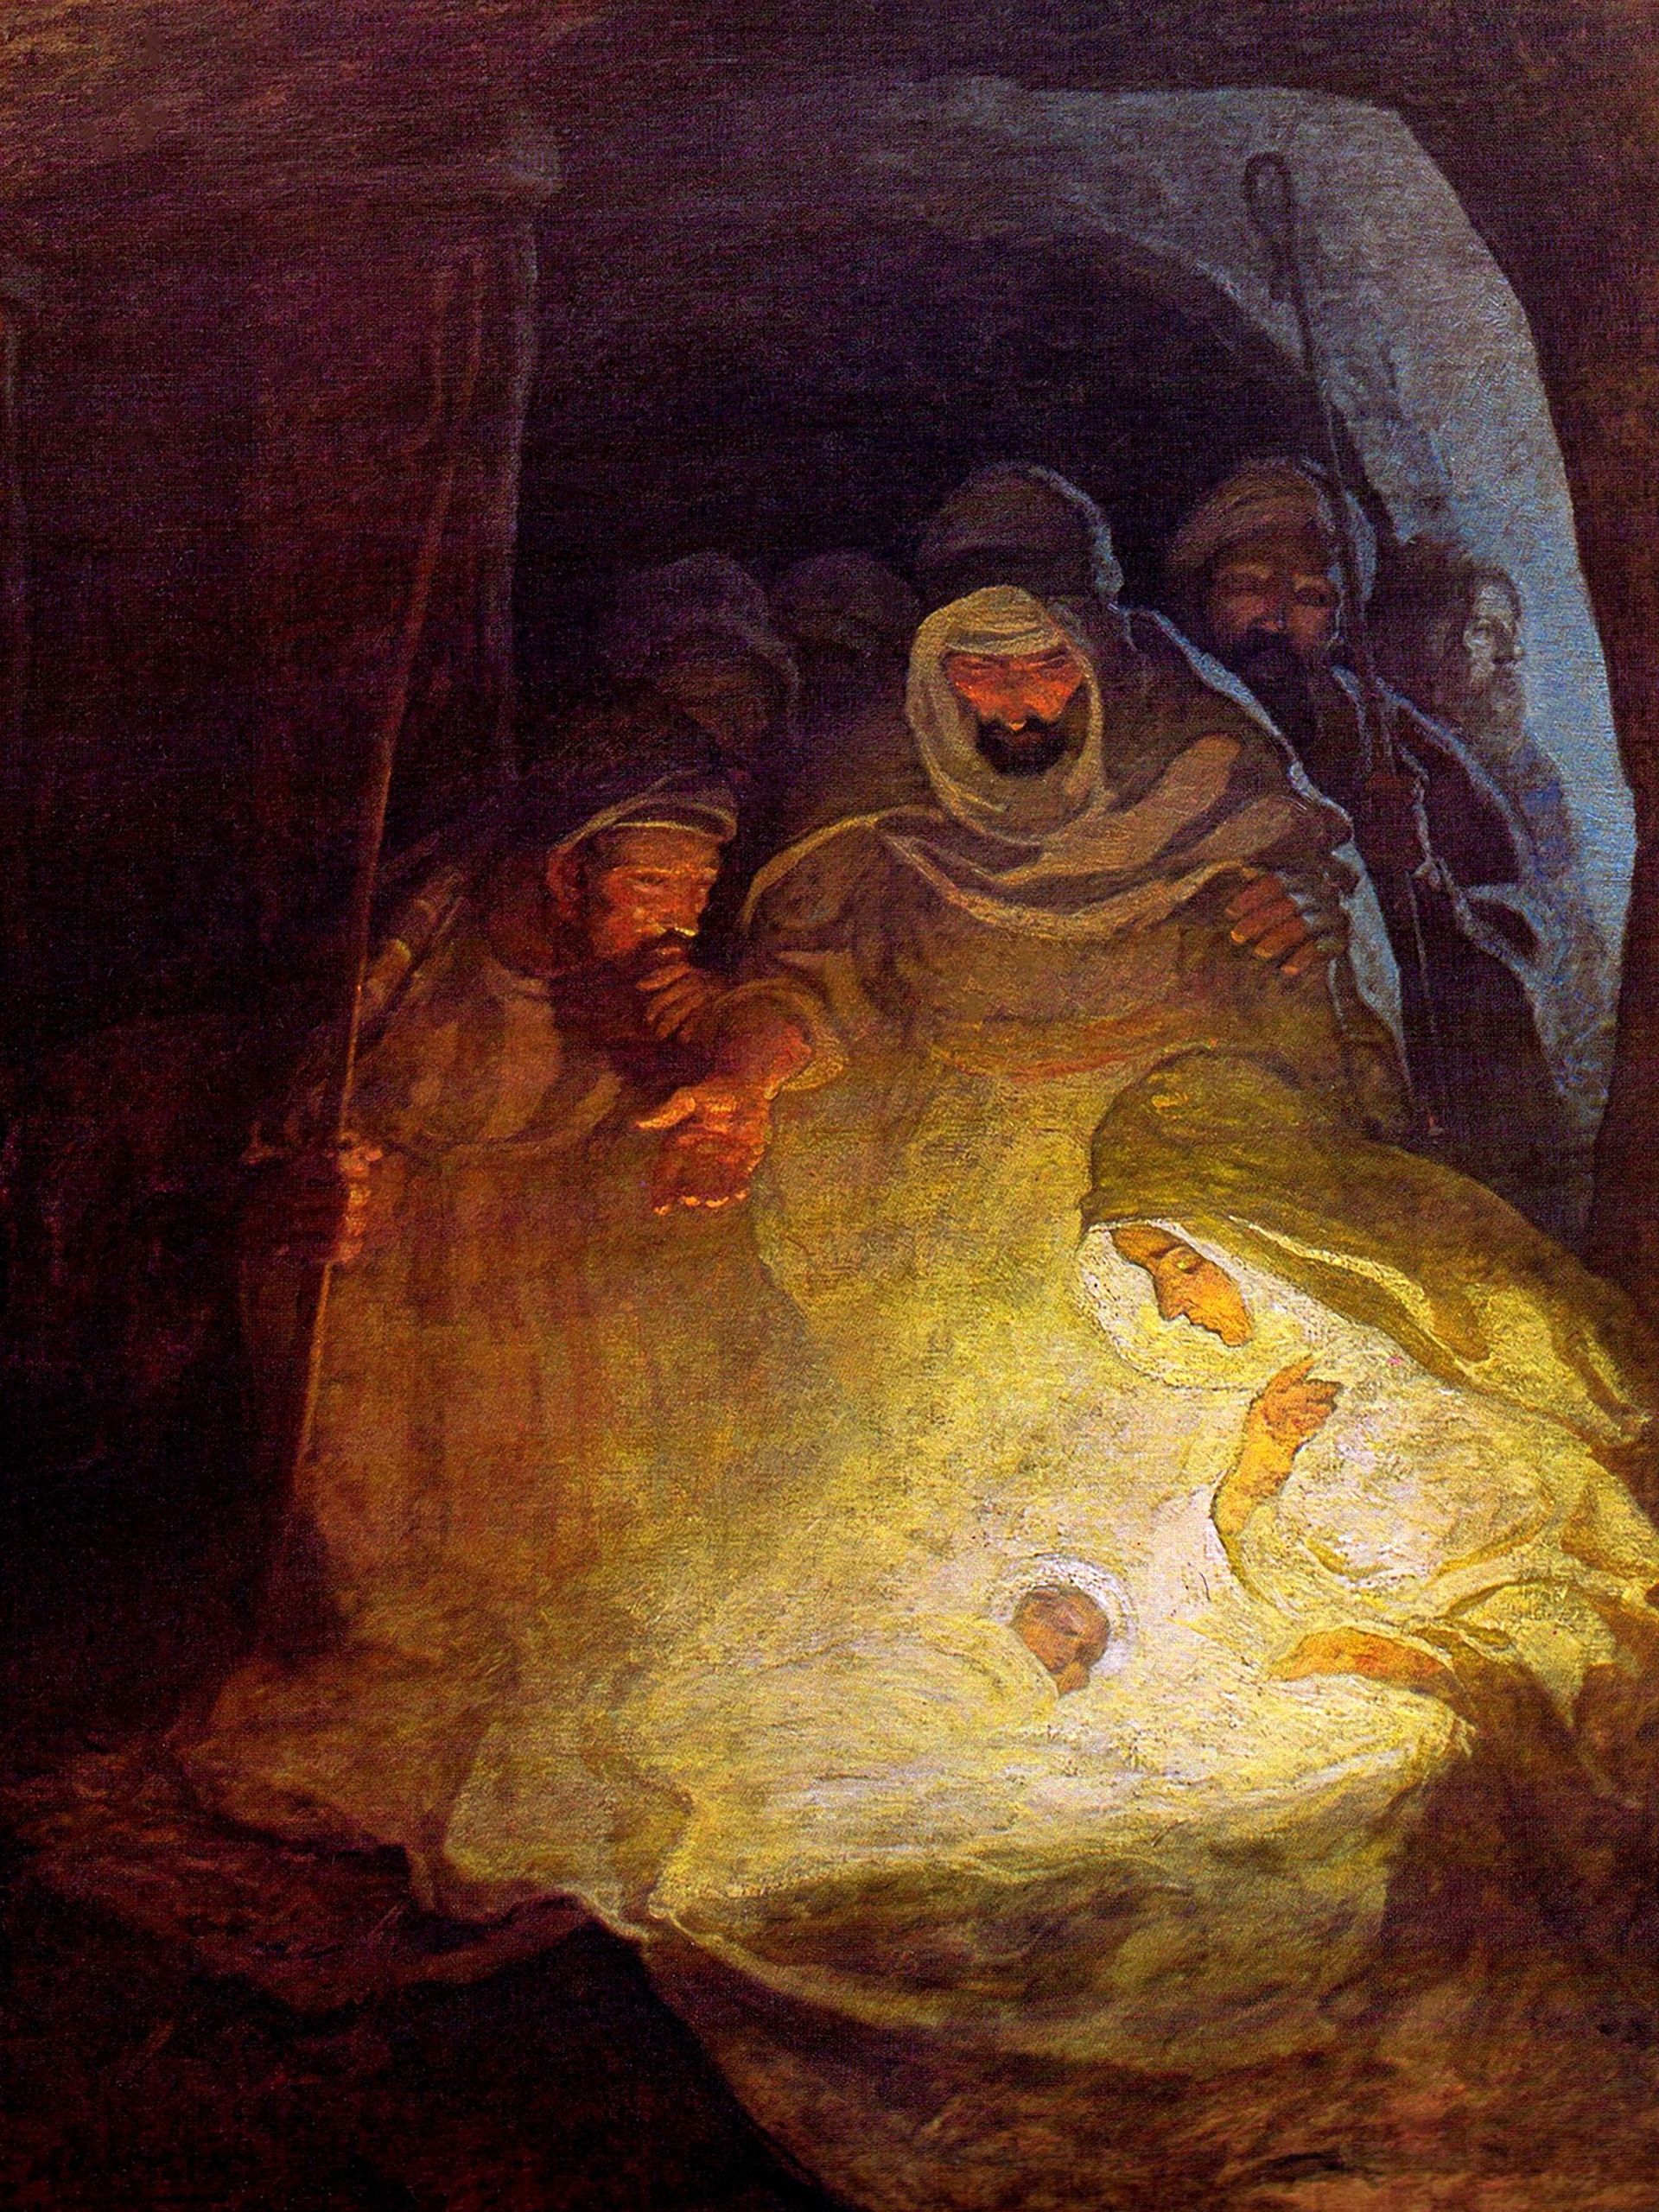 Painting of Mary, Joseph, and the baby Jesus in the stable, with shepherds in the background.